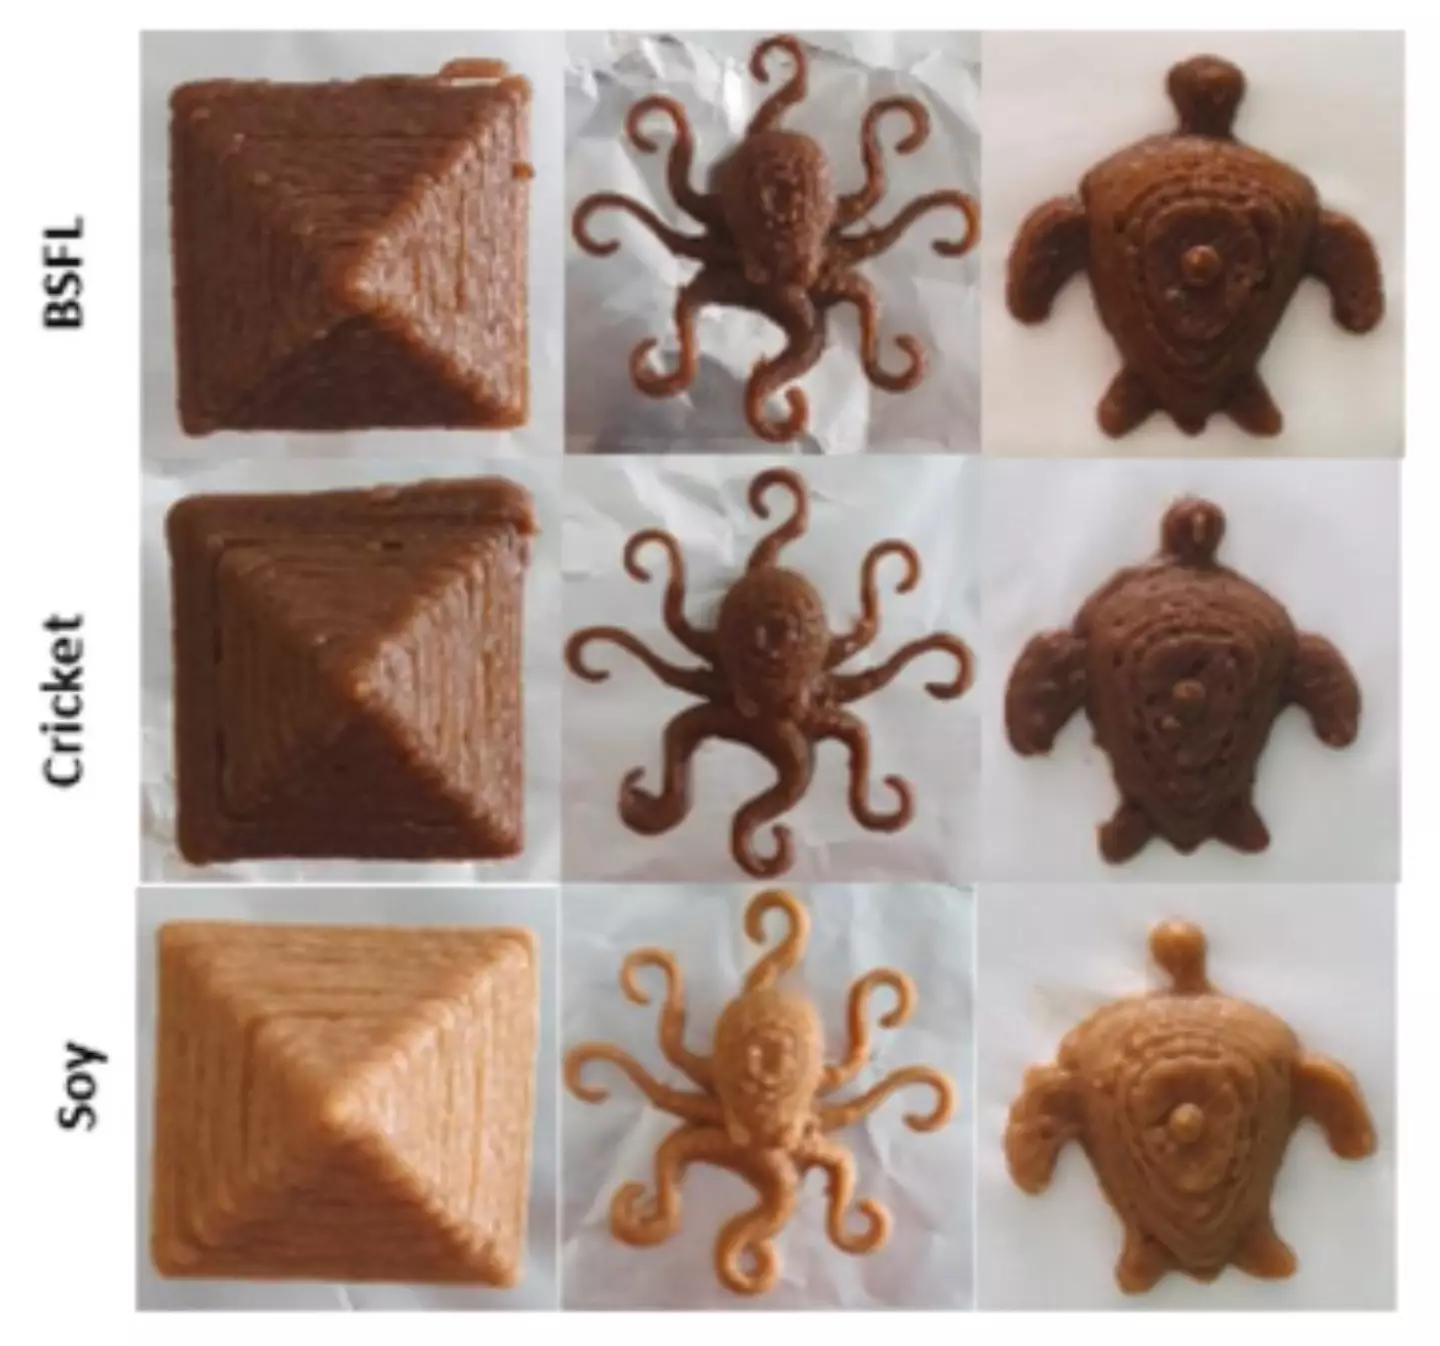 Researchers 3D printed food made out of insects.